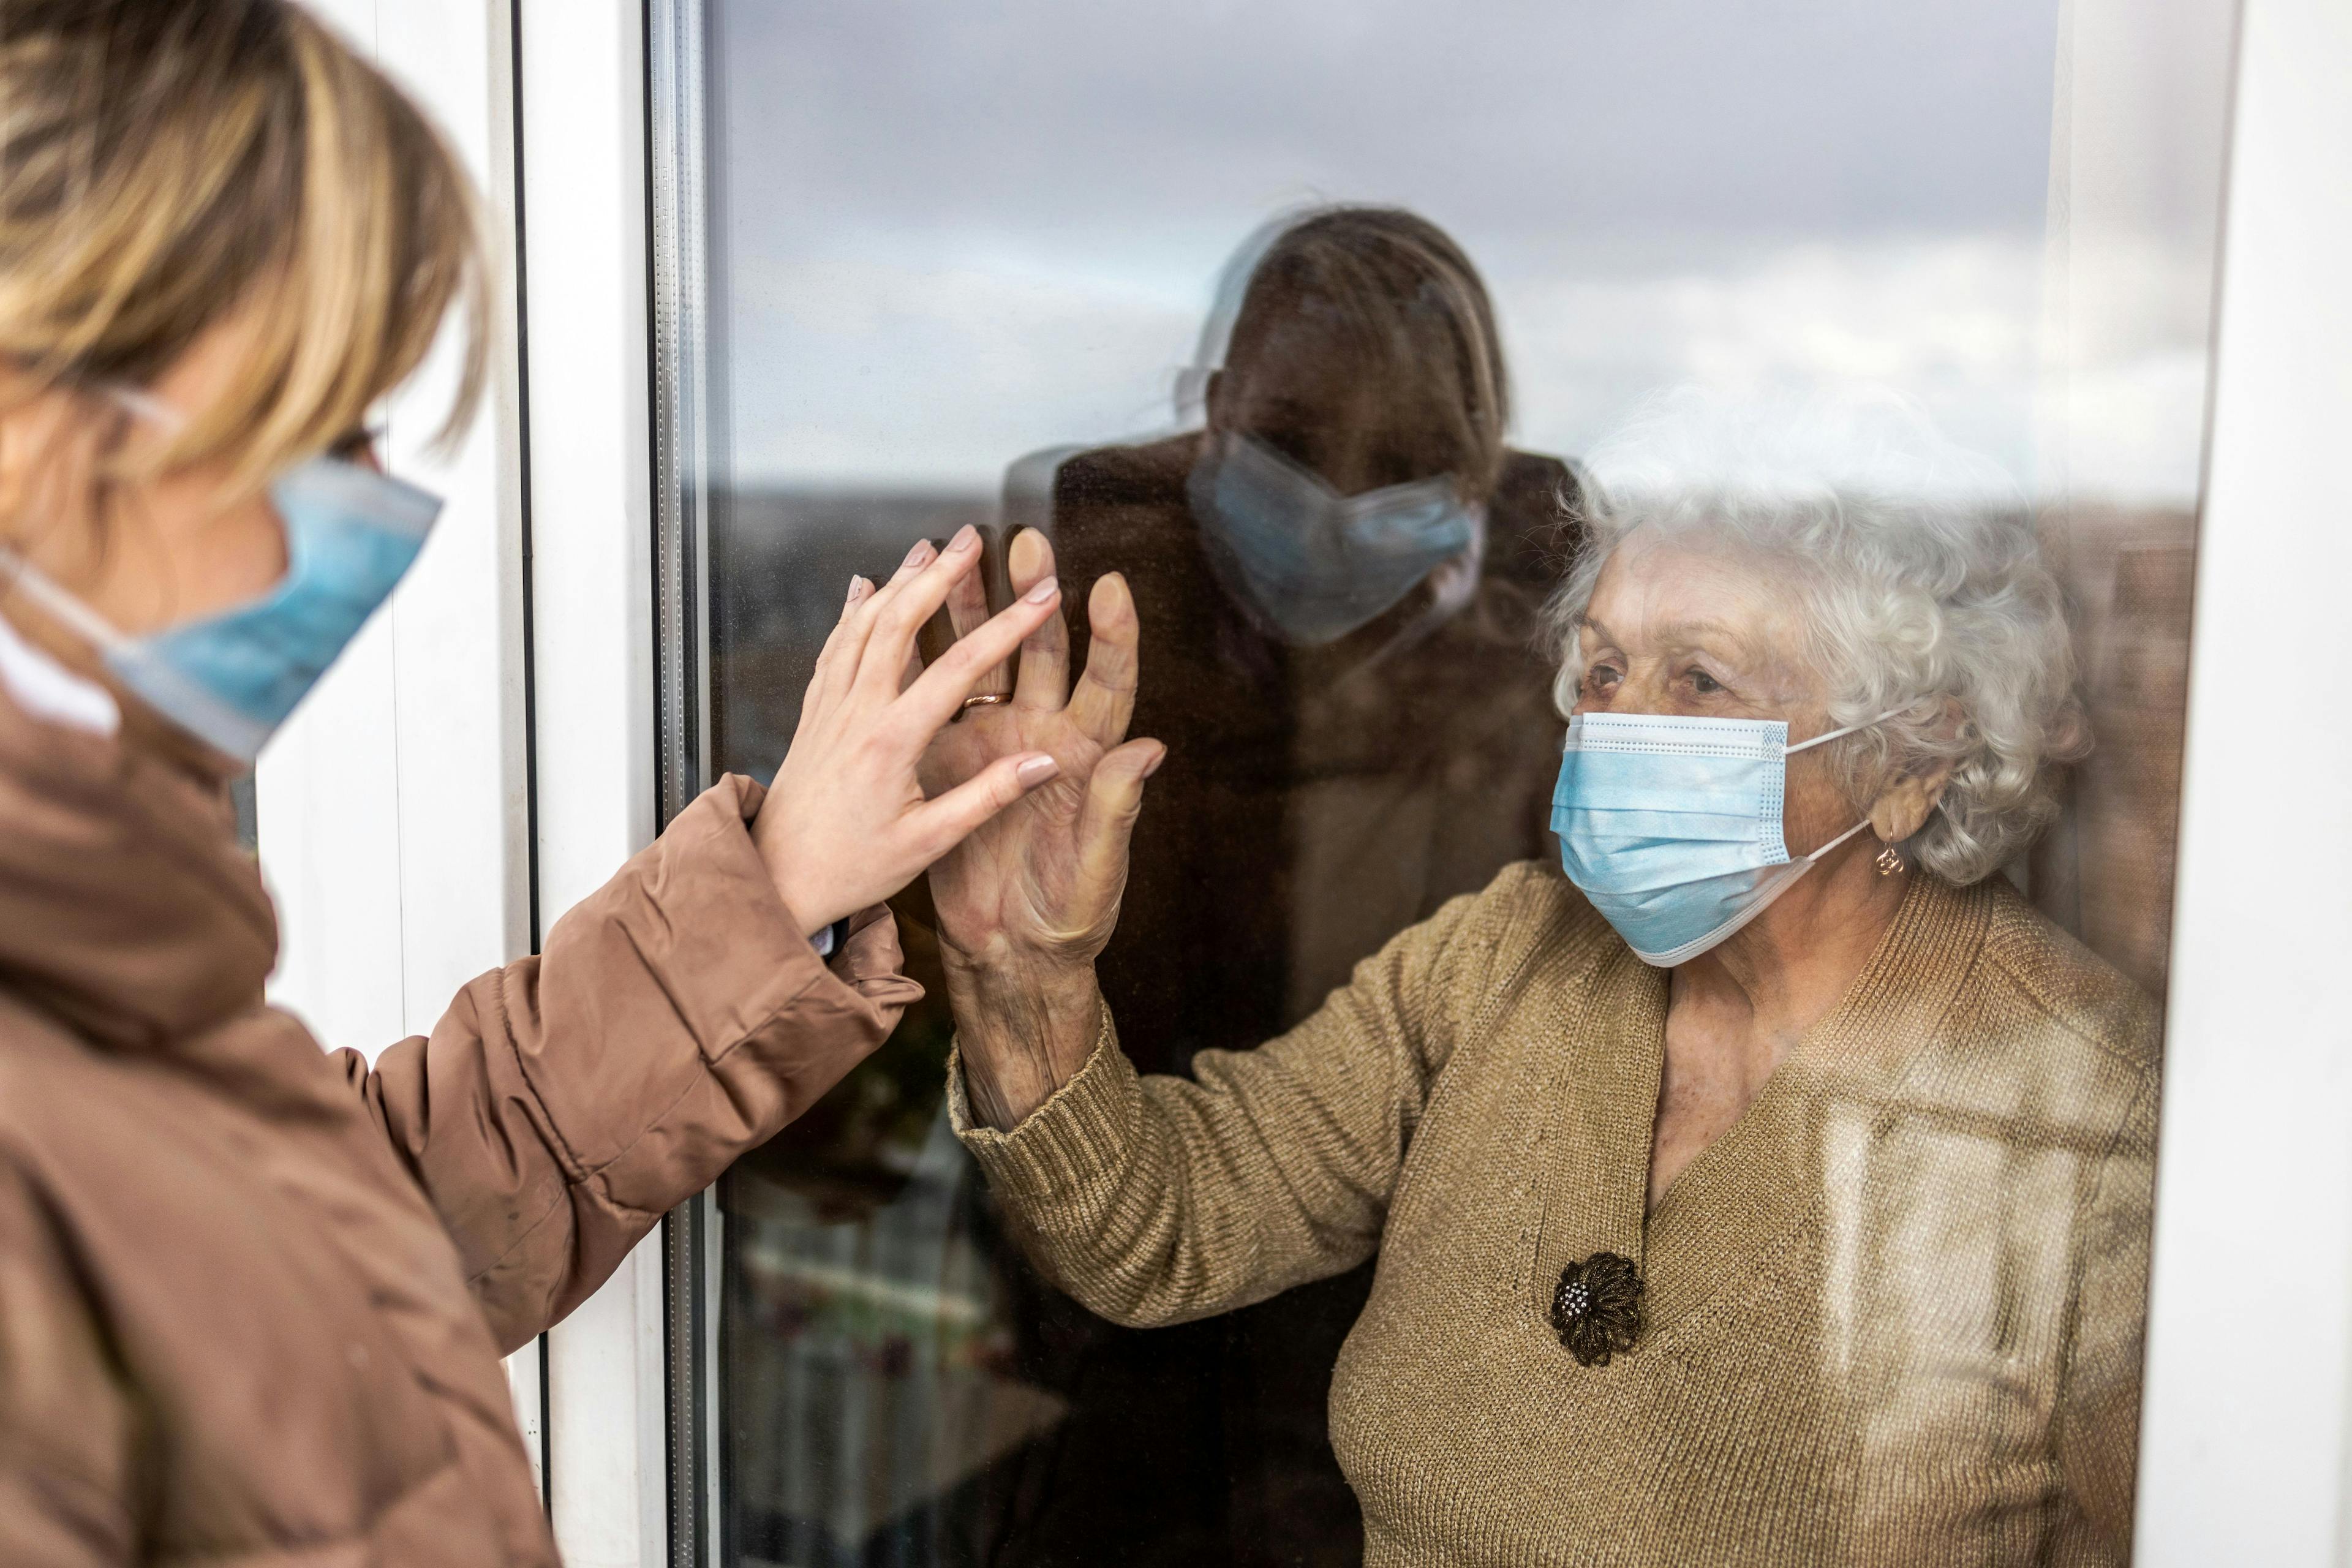 Woman visiting her grandmother in isolation during a coronavirus pandemic | Image credit: Pikselstock - stock.adobe.com